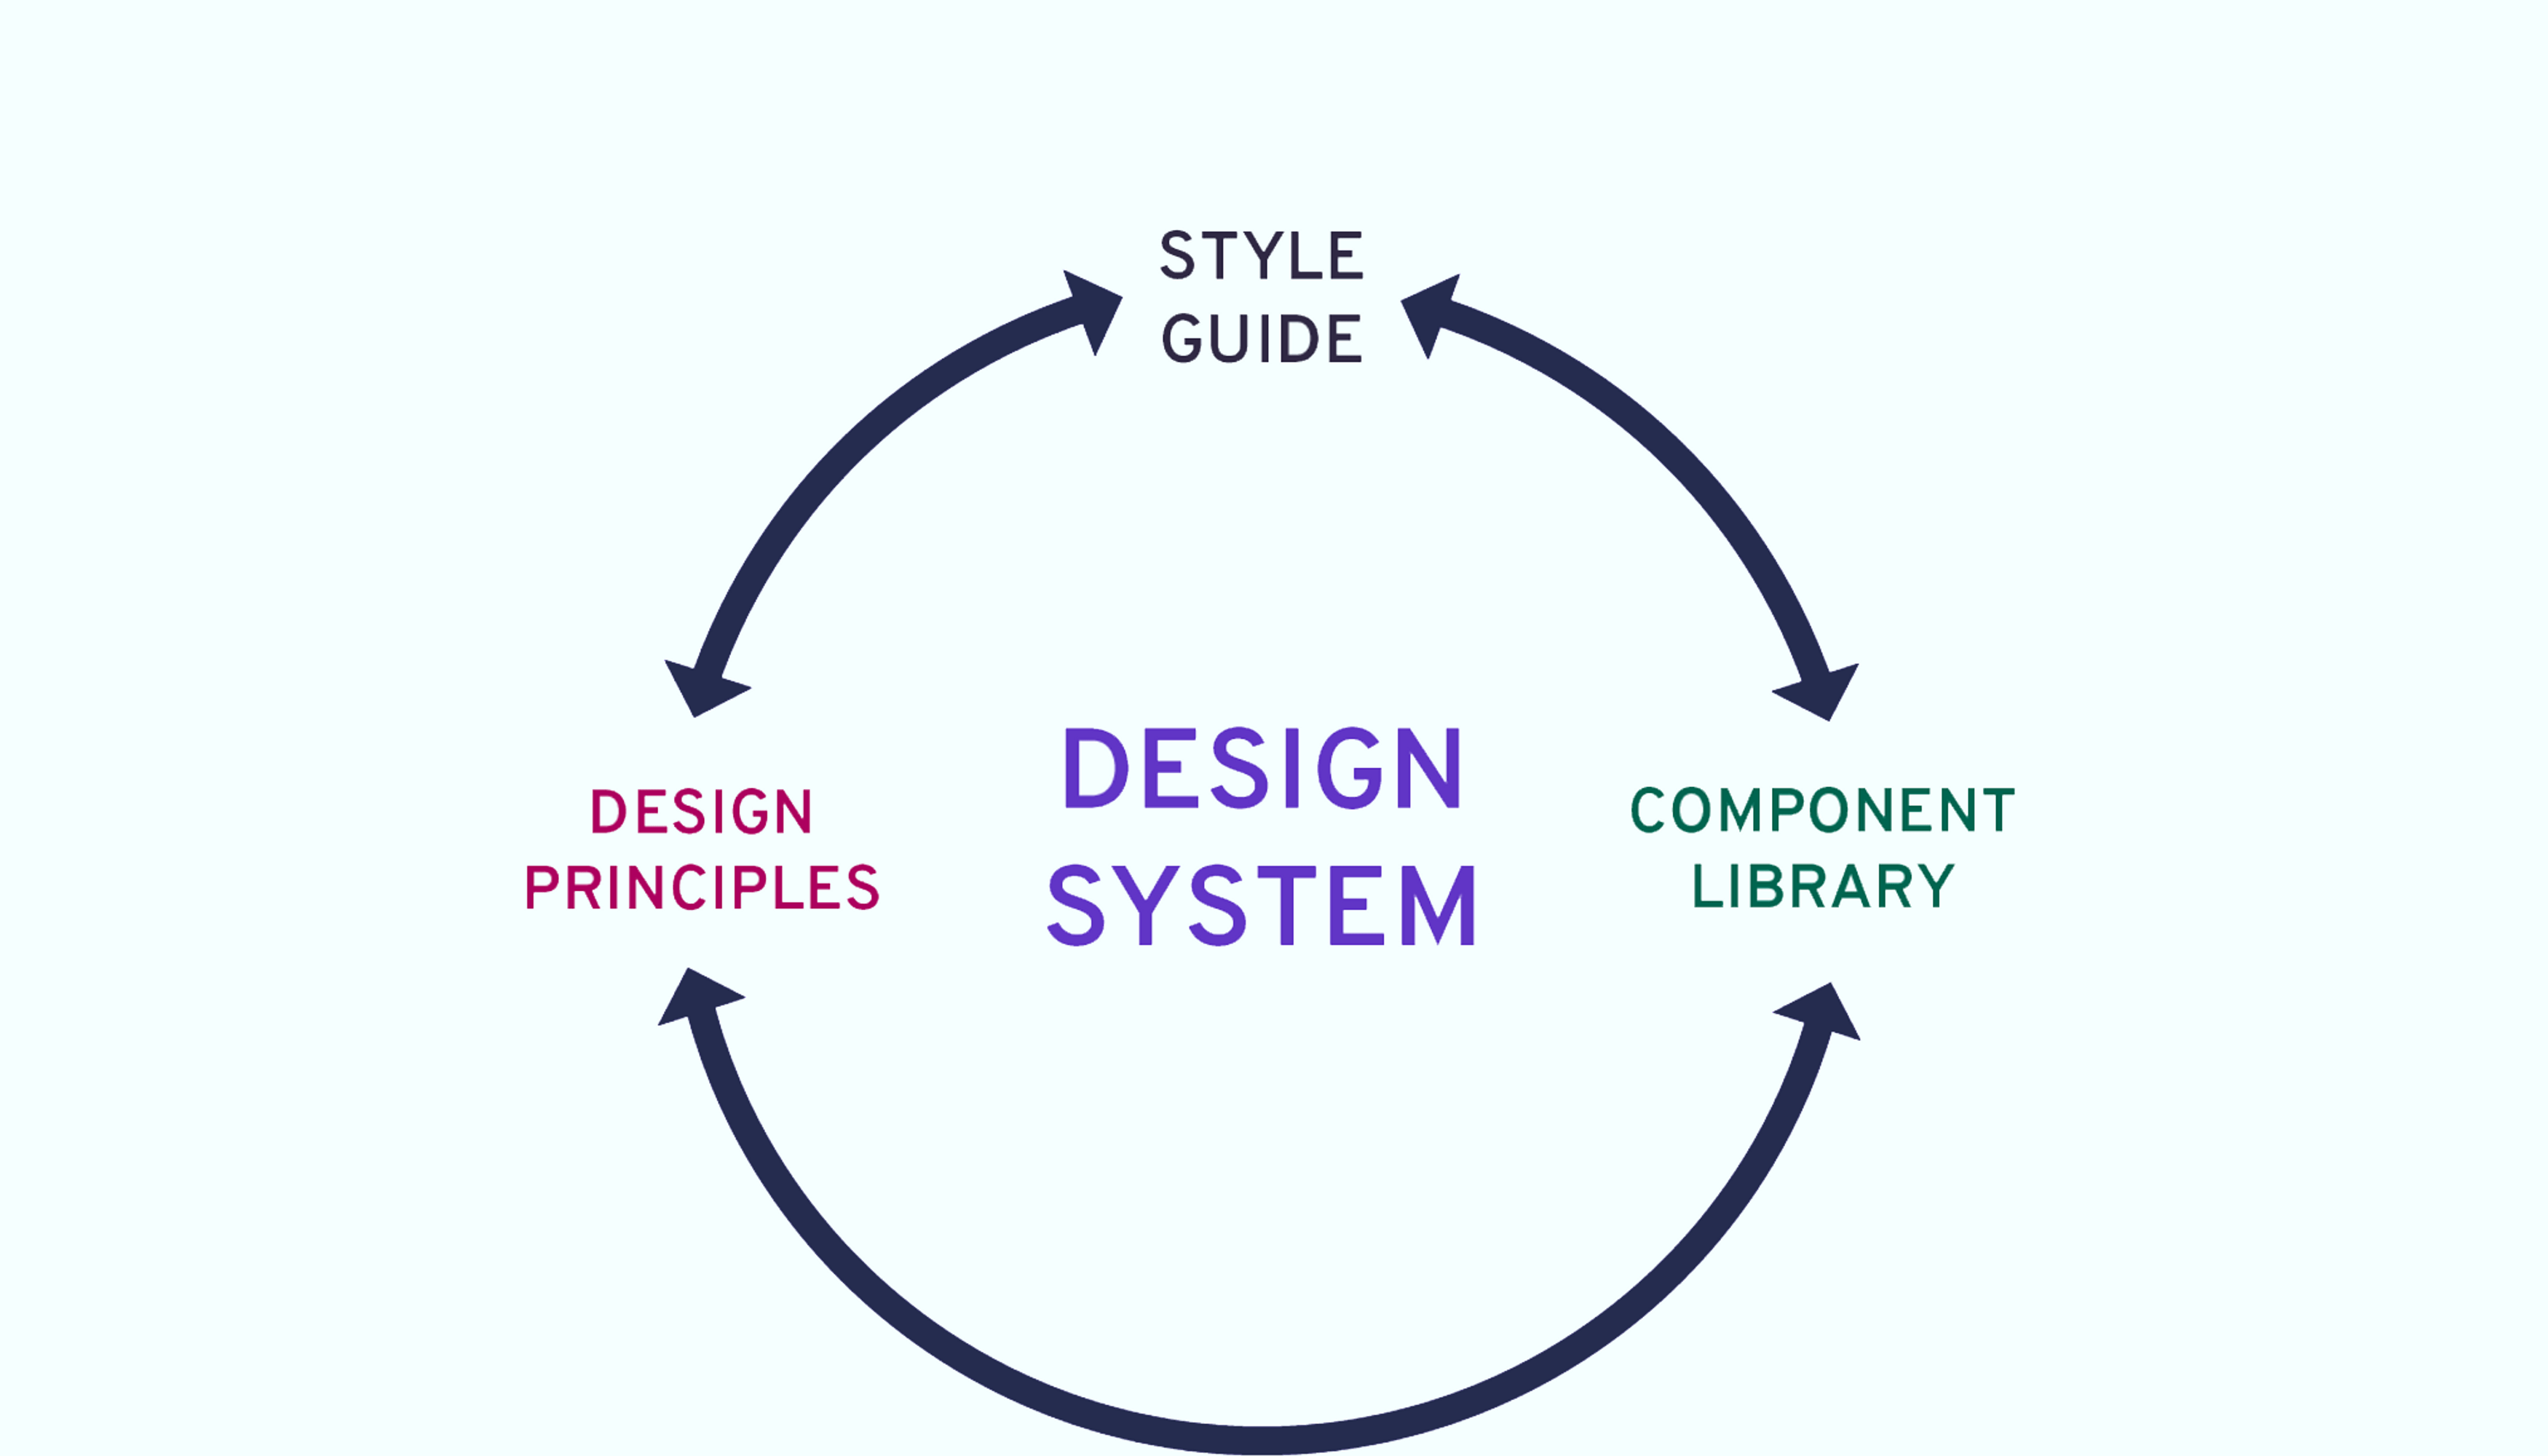 A visual aid of what a design system can be